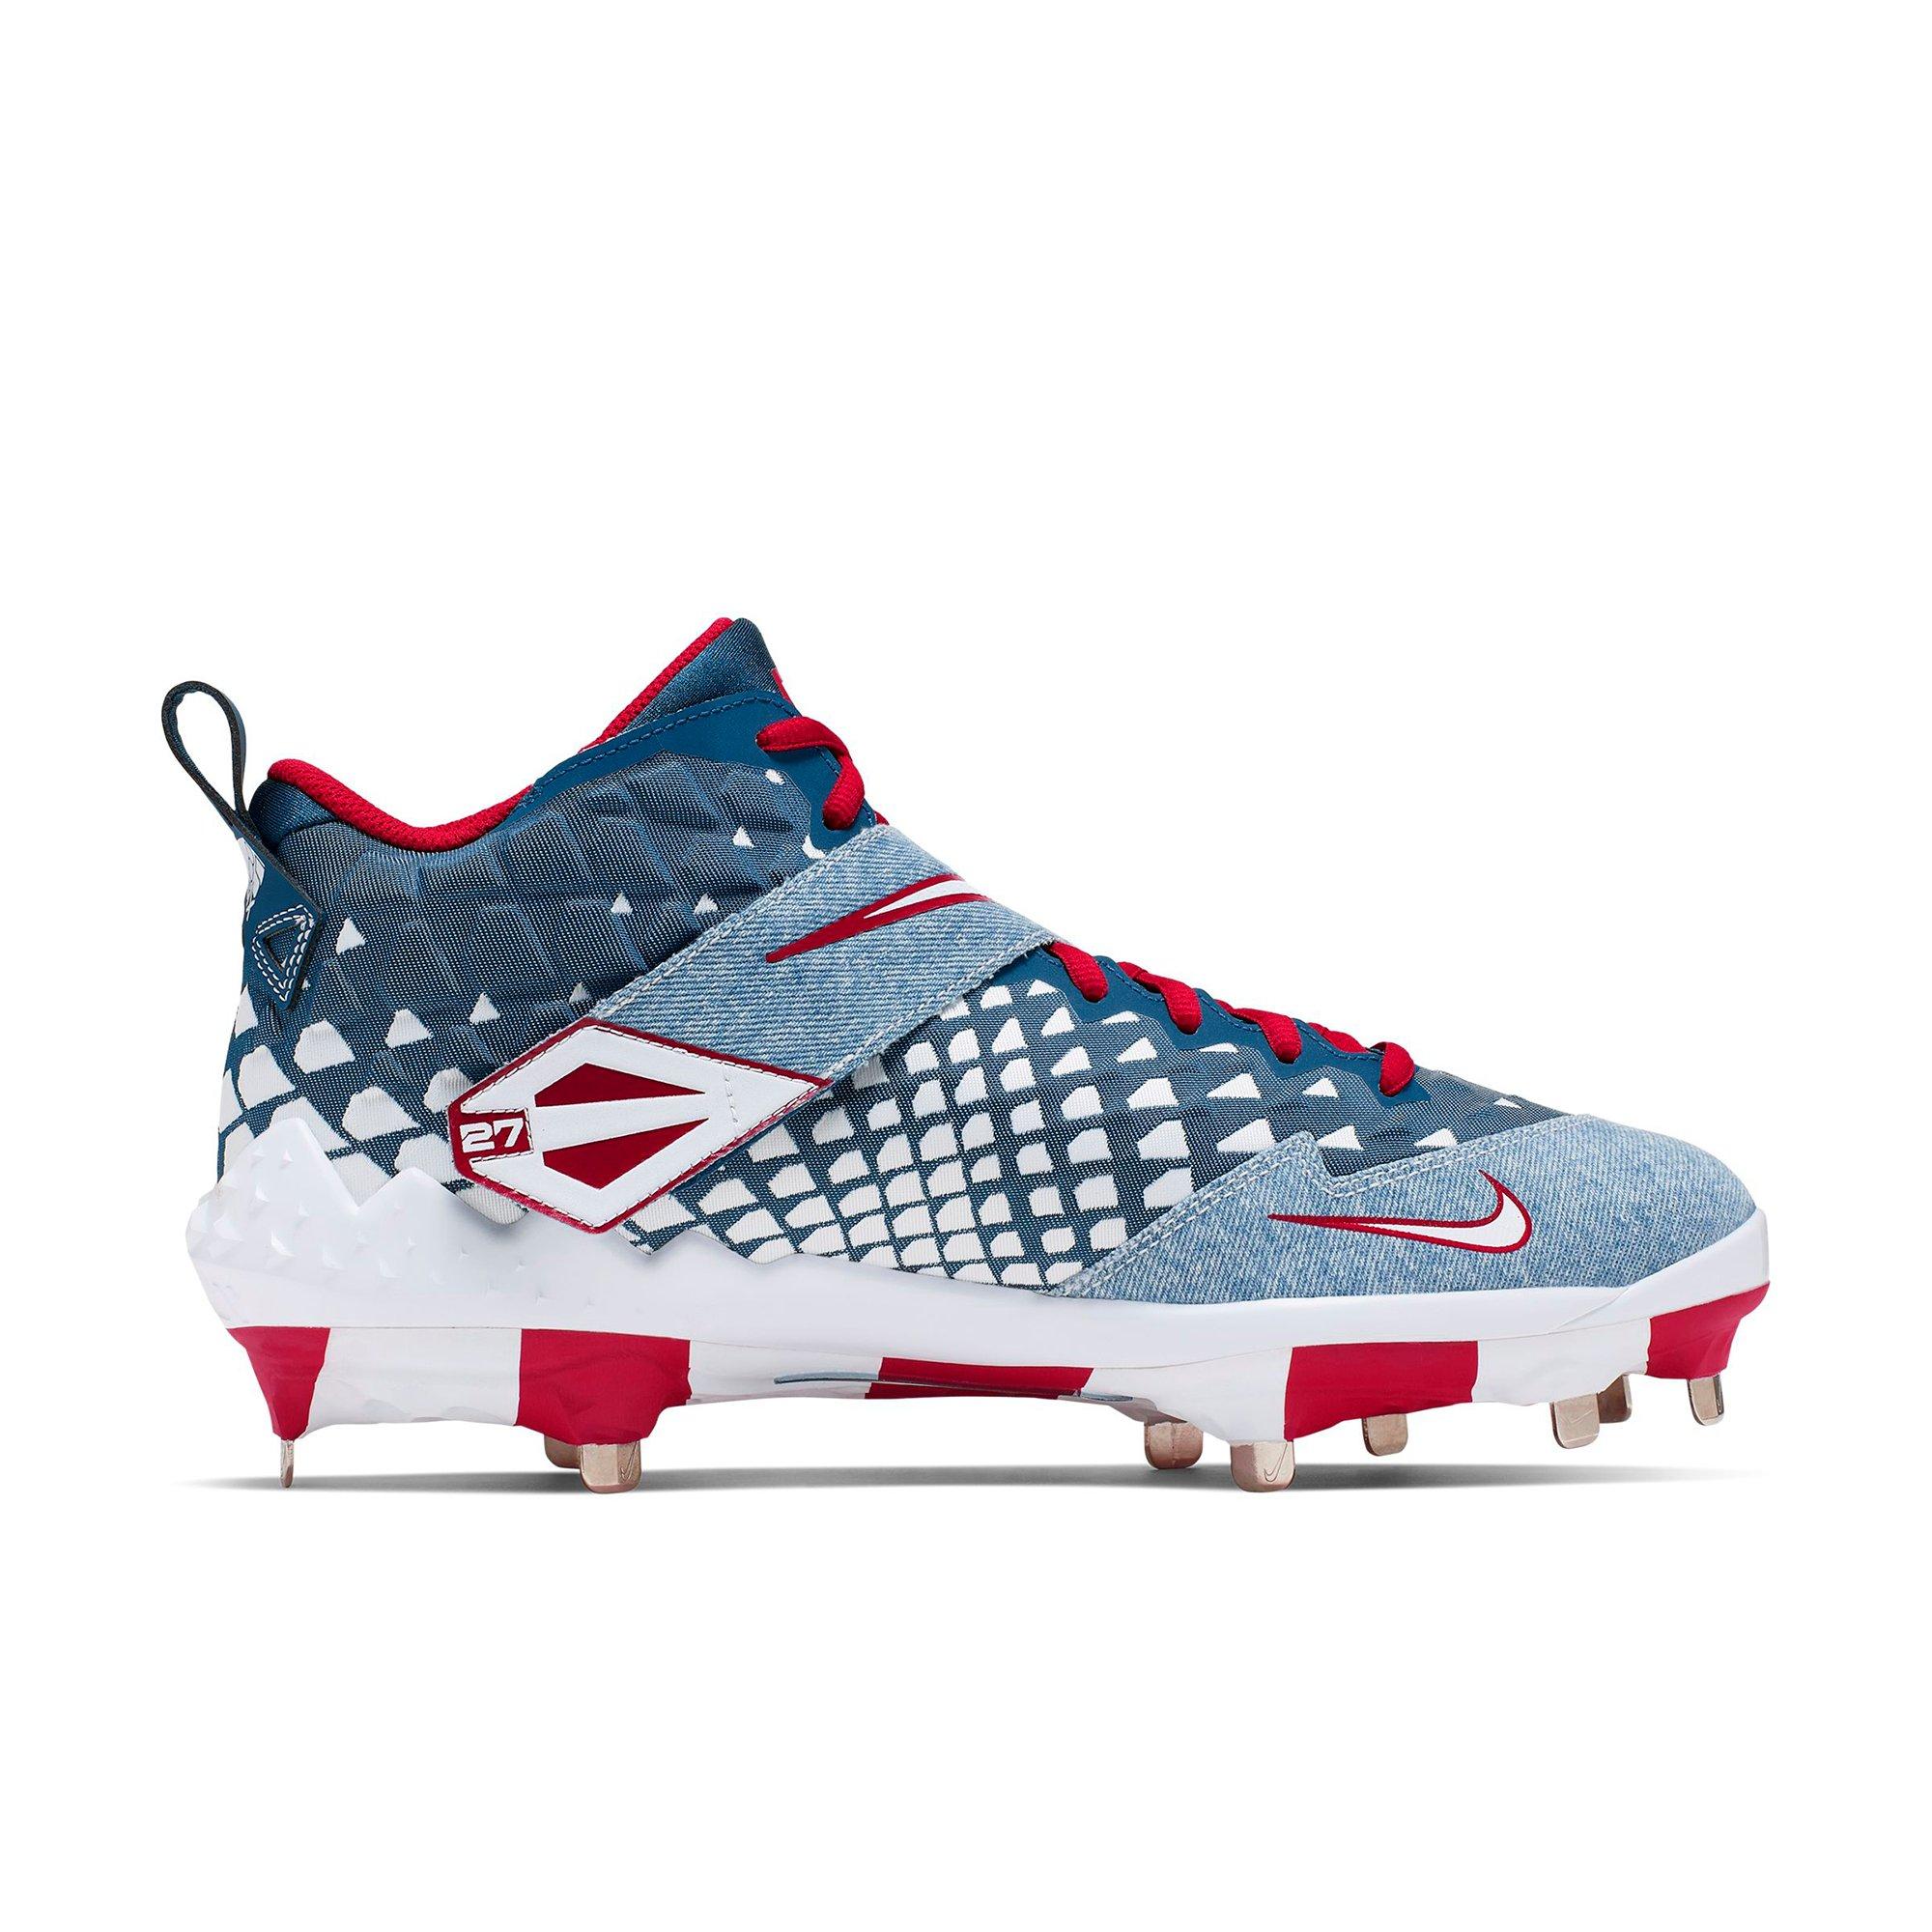 mike trout white cleats